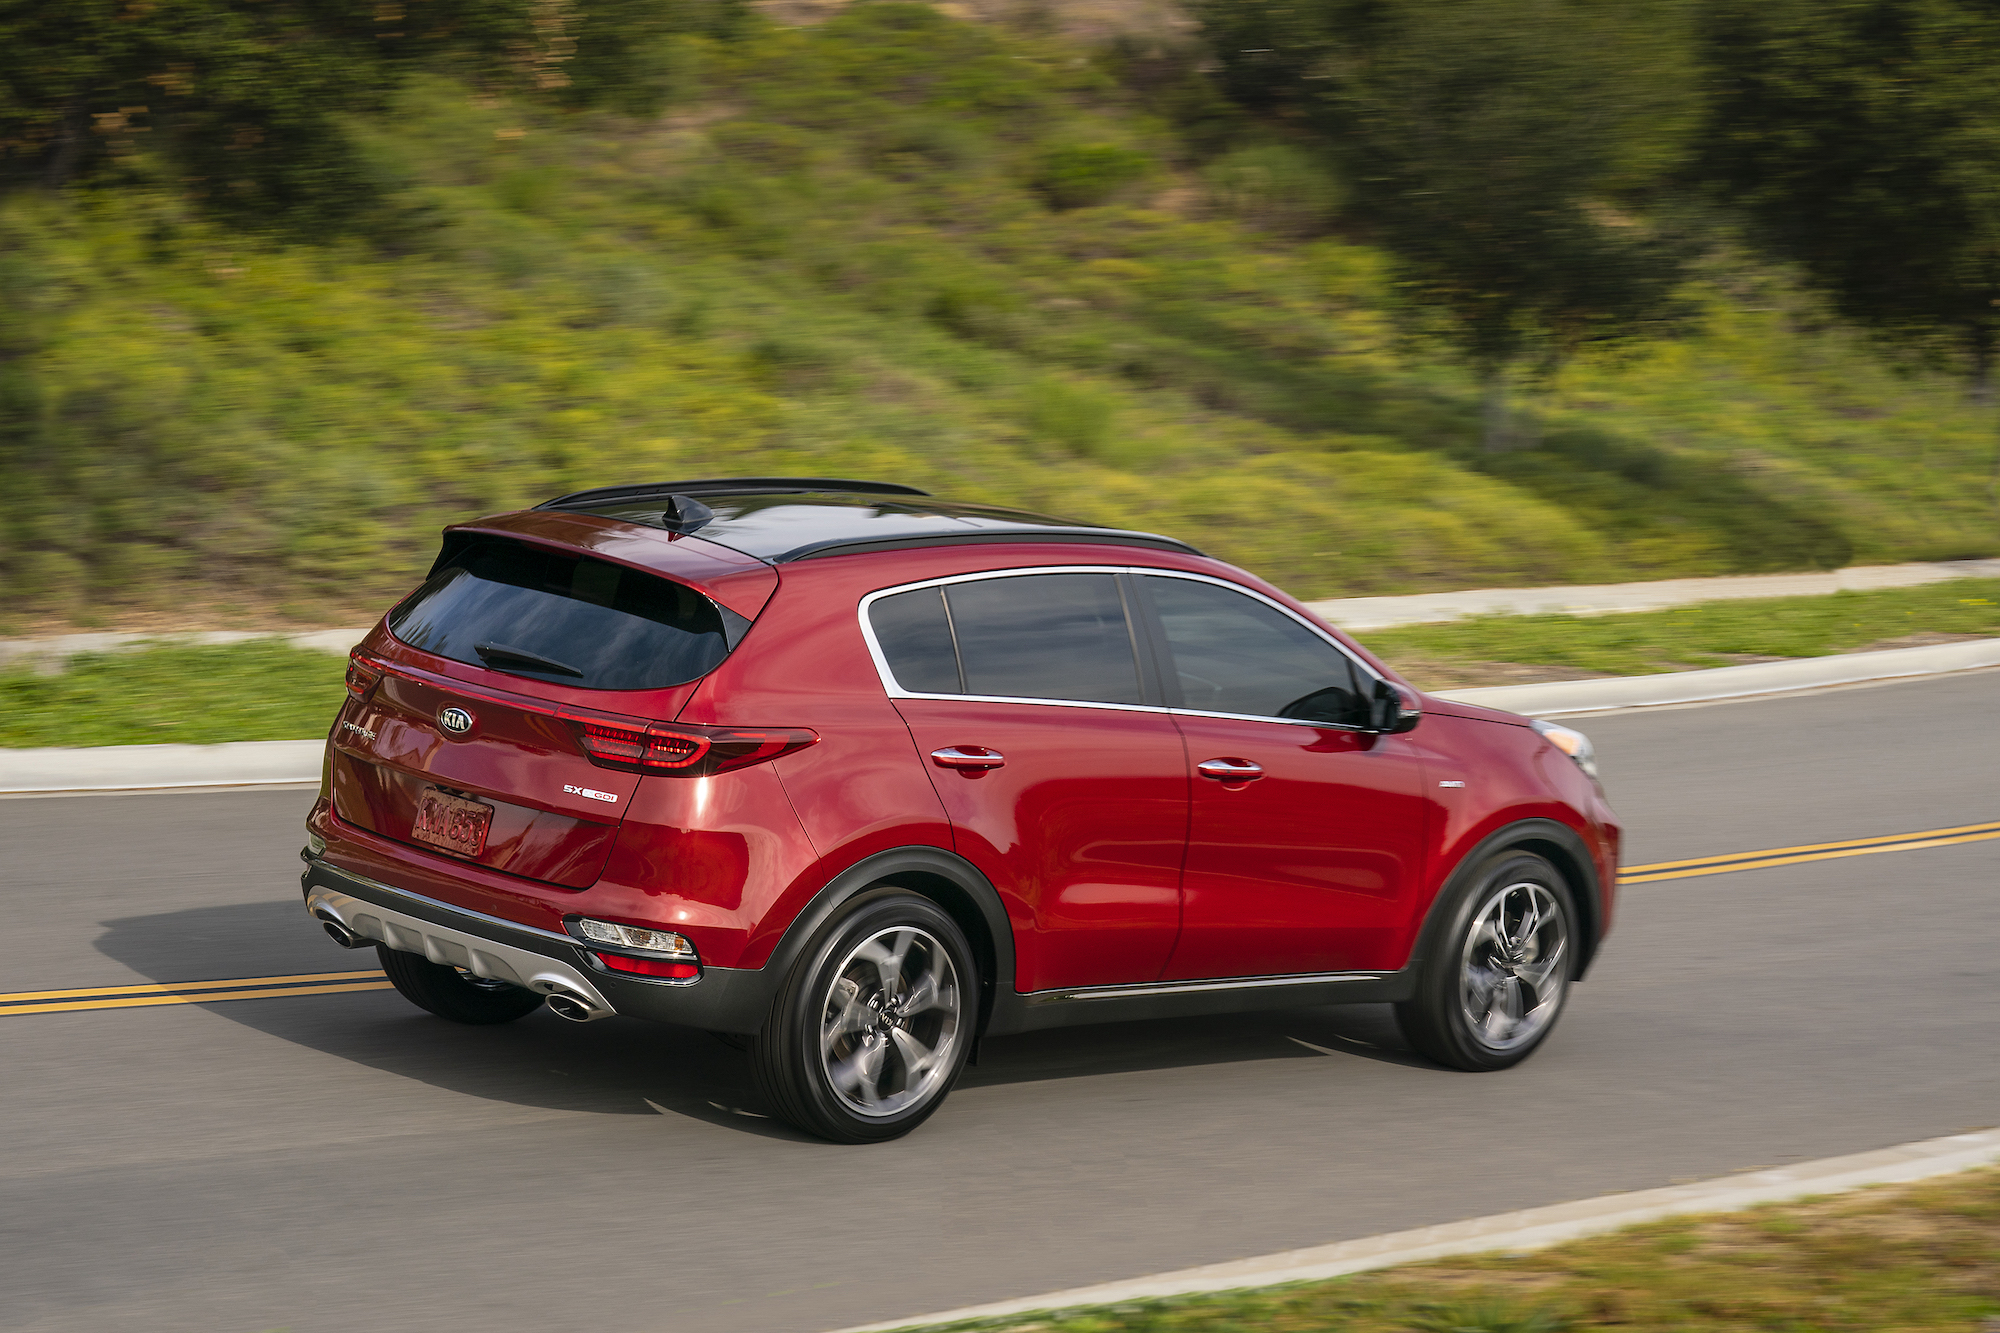 A red 2021 Kia Sportage compact SUV travels on a two-lane highway on a grassy, tree-dotted hill